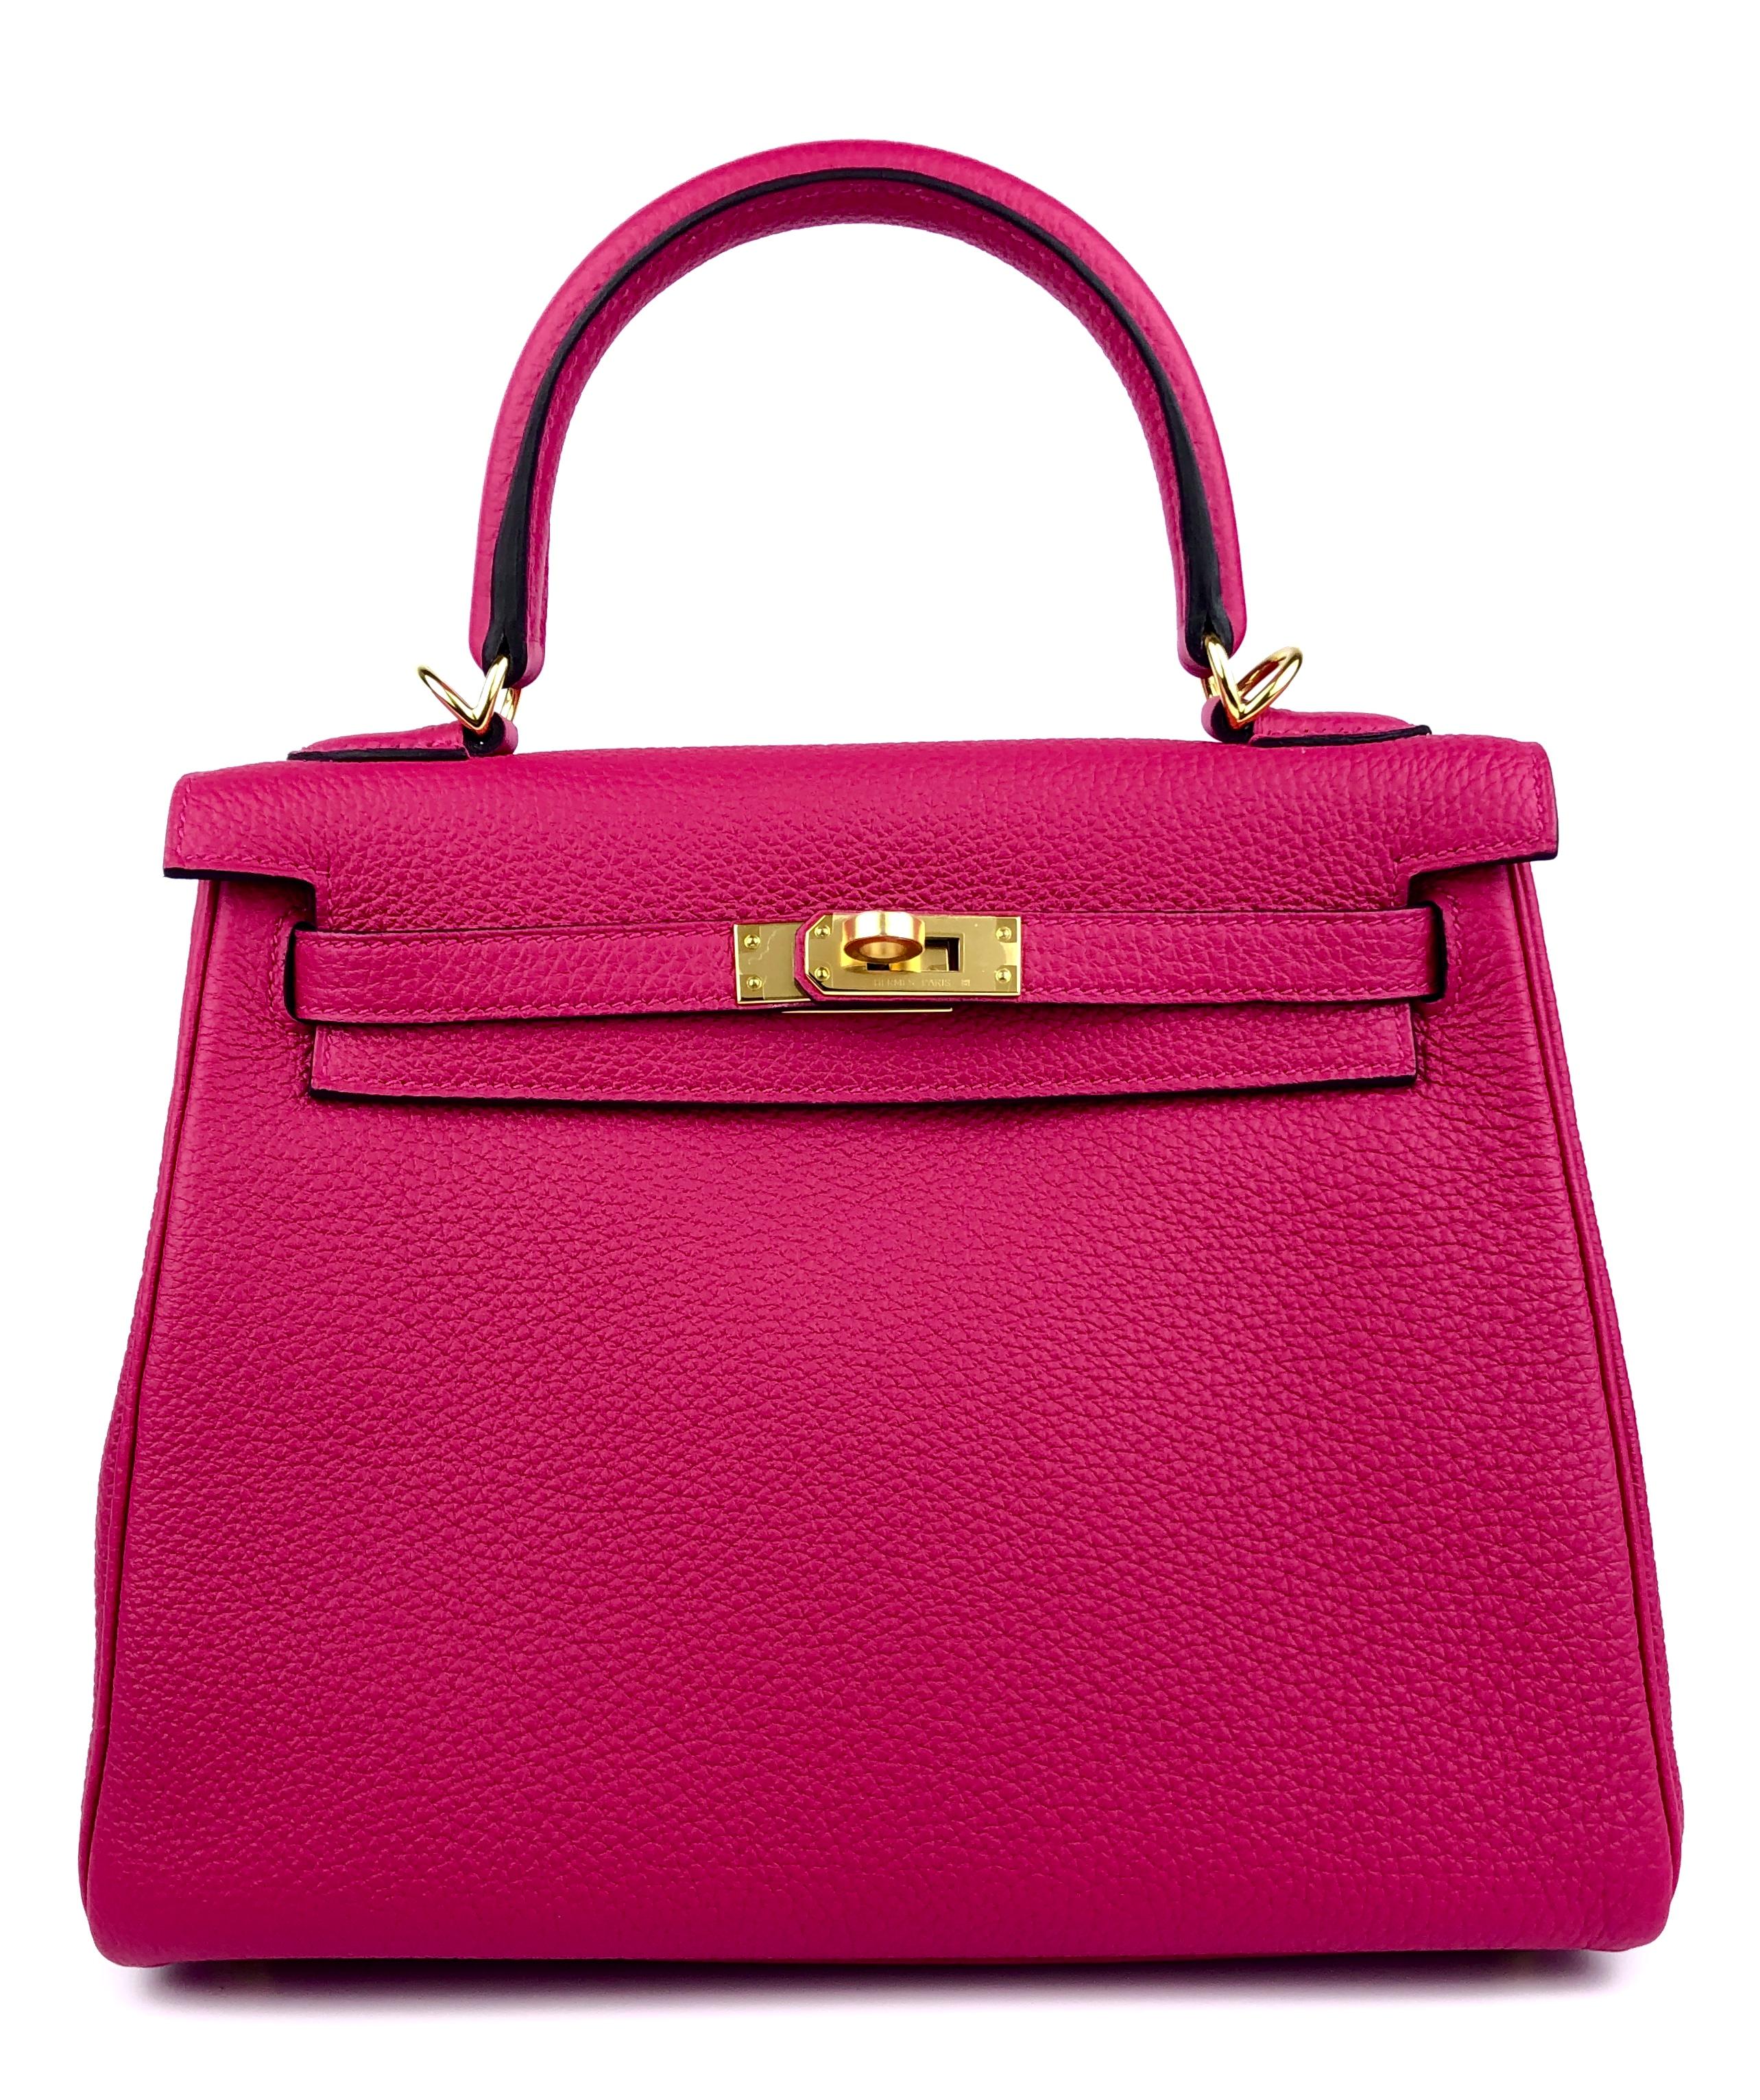 Stunning As New Hermes Kelly 25 Framboise Pink Togo Leather Gold Hardware. Y Stamp 2020. 

Shop with Confidence from Lux Addicts. Authenticity Guaranteed! 

Lux Addicts is a Premier Luxury Dealer and one of the most trusted sellers in the luxury